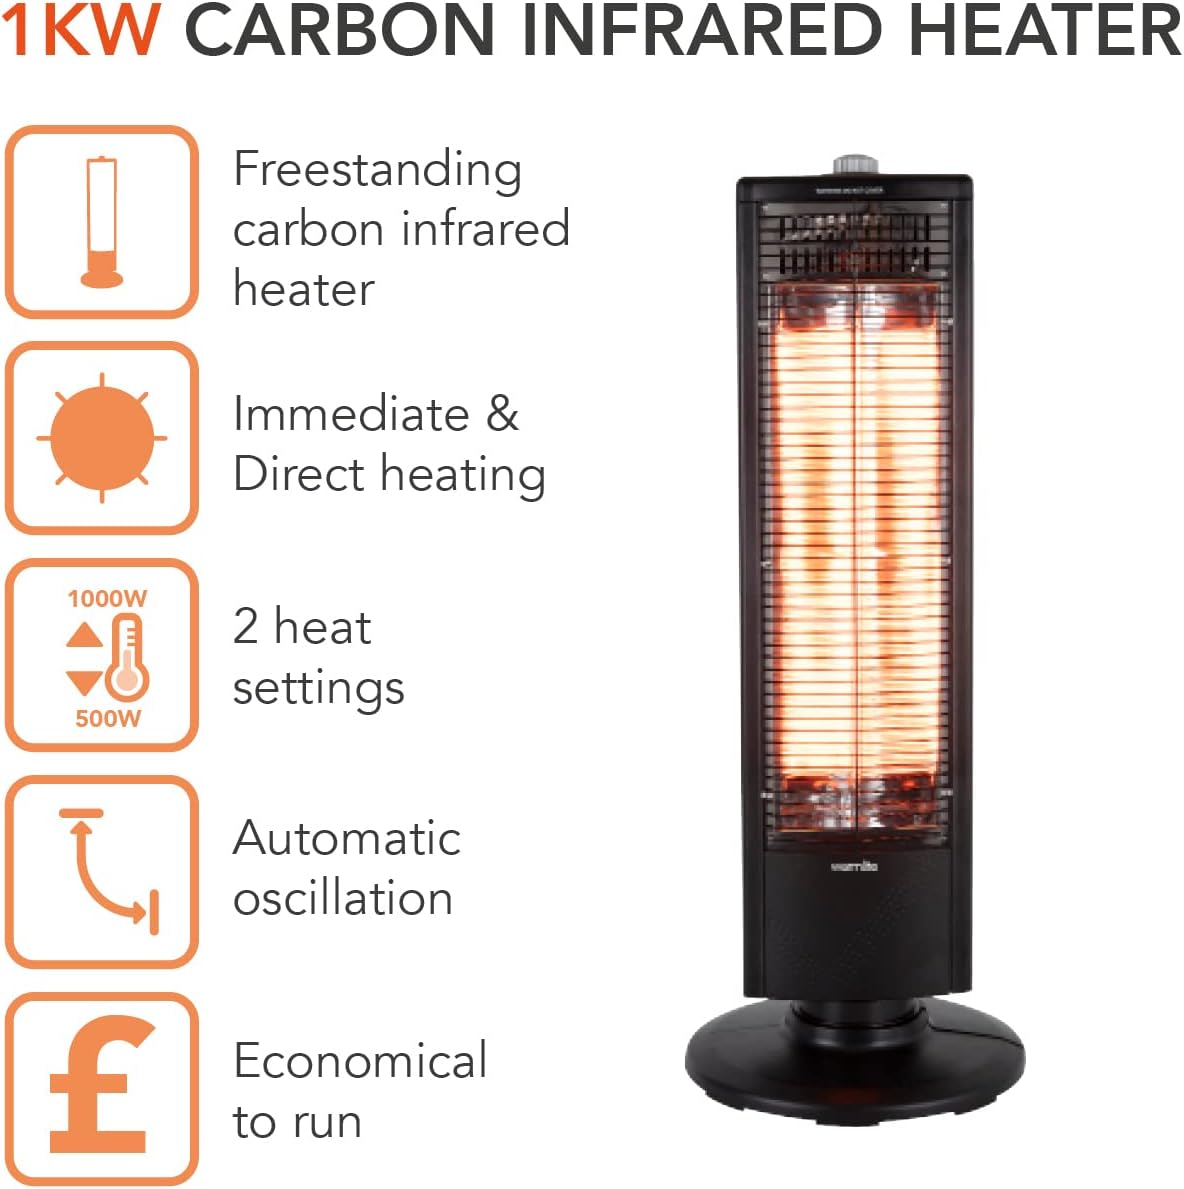 Warmlite WL42013 1KW Carbon Infrared Heater with Oscillation, Adjustable Thermostat and Overheat Protection, Black,80.5 cmx17.0 cmx22.5 cm